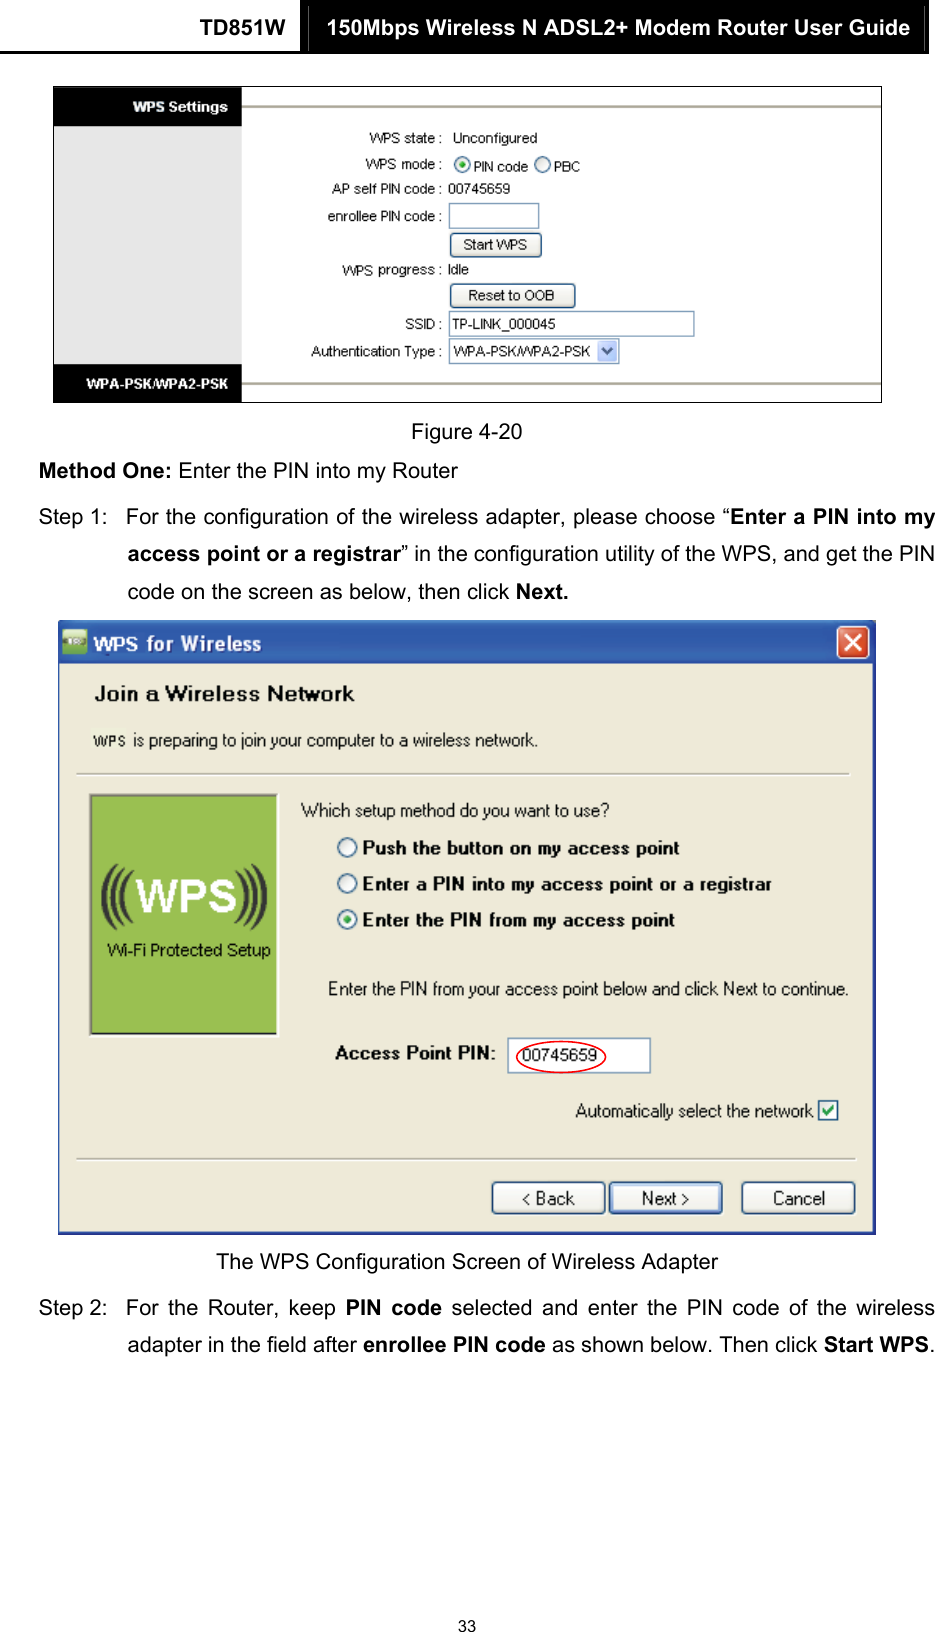 TD851W  150Mbps Wireless N ADSL2+ Modem Router User Guide 33  Figure 4-20 Method One: Enter the PIN into my Router Step 1:  For the configuration of the wireless adapter, please choose “Enter a PIN into my access point or a registrar” in the configuration utility of the WPS, and get the PIN code on the screen as below, then click Next.    The WPS Configuration Screen of Wireless Adapter Step 2:  For the Router, keep PIN code selected and enter the PIN code of the wireless adapter in the field after enrollee PIN code as shown below. Then click Start WPS. 